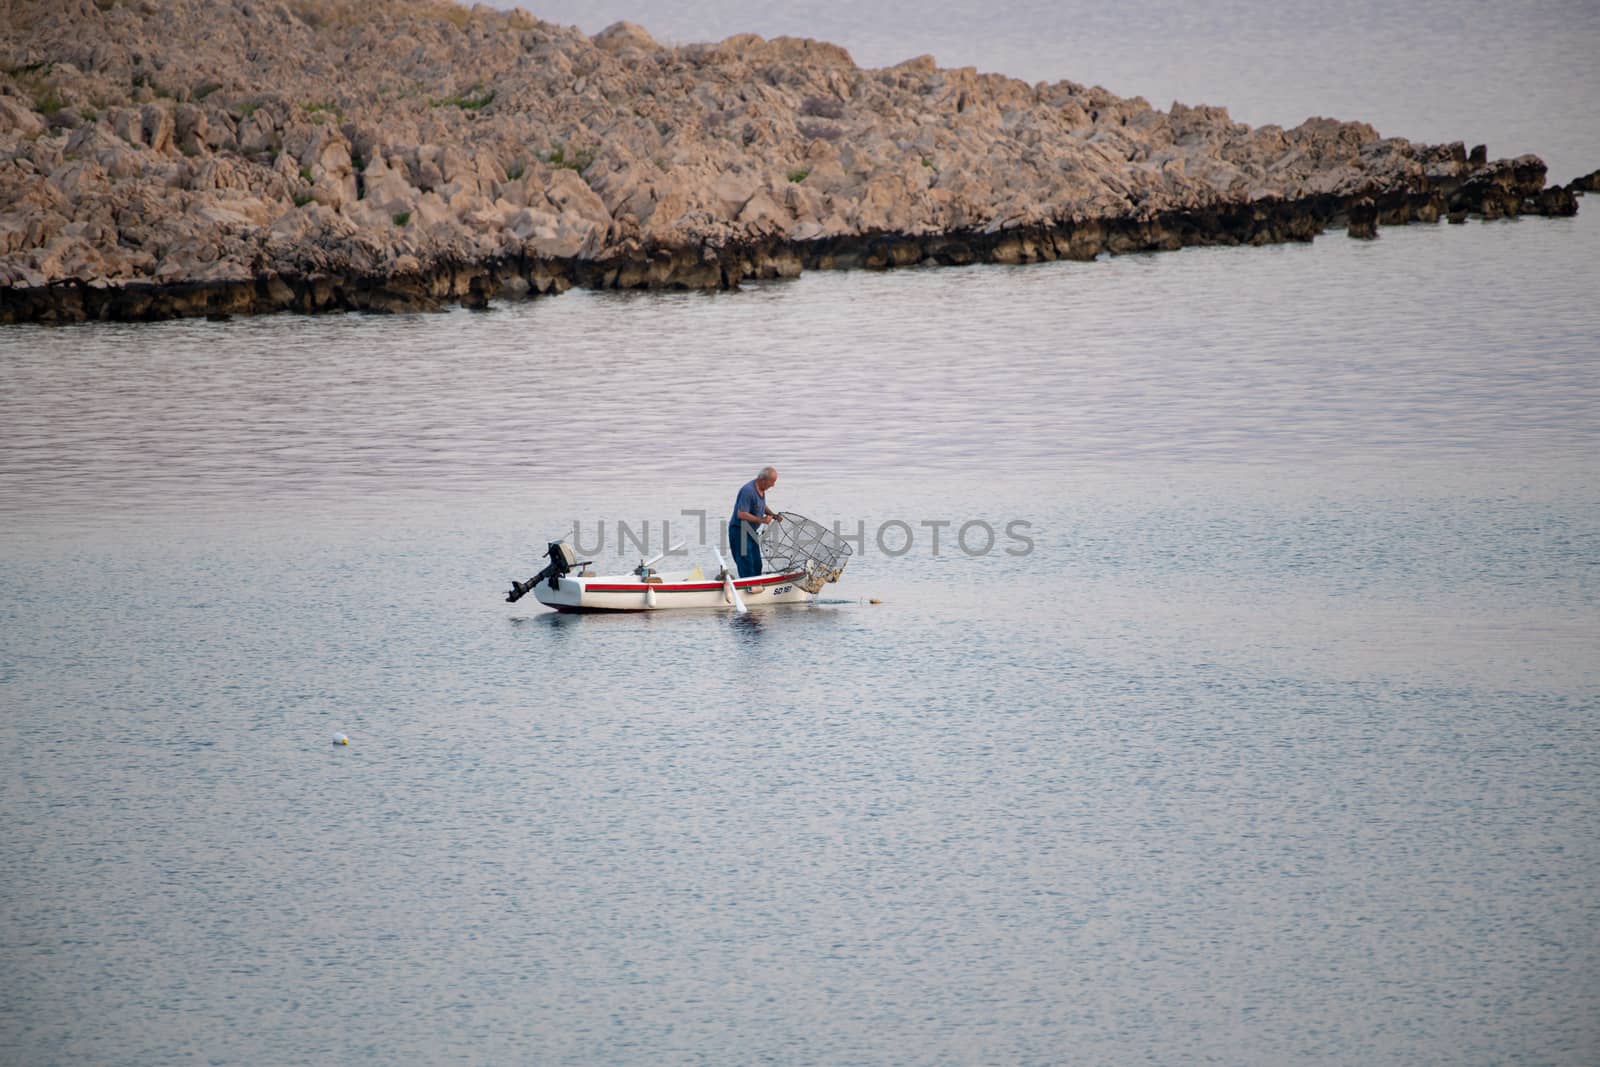 Old traditional fisherman in Croatia on a small wooden boat catching fish with fishing cage, pod, the catch is small due overfishing and makes a hard living the traditional way